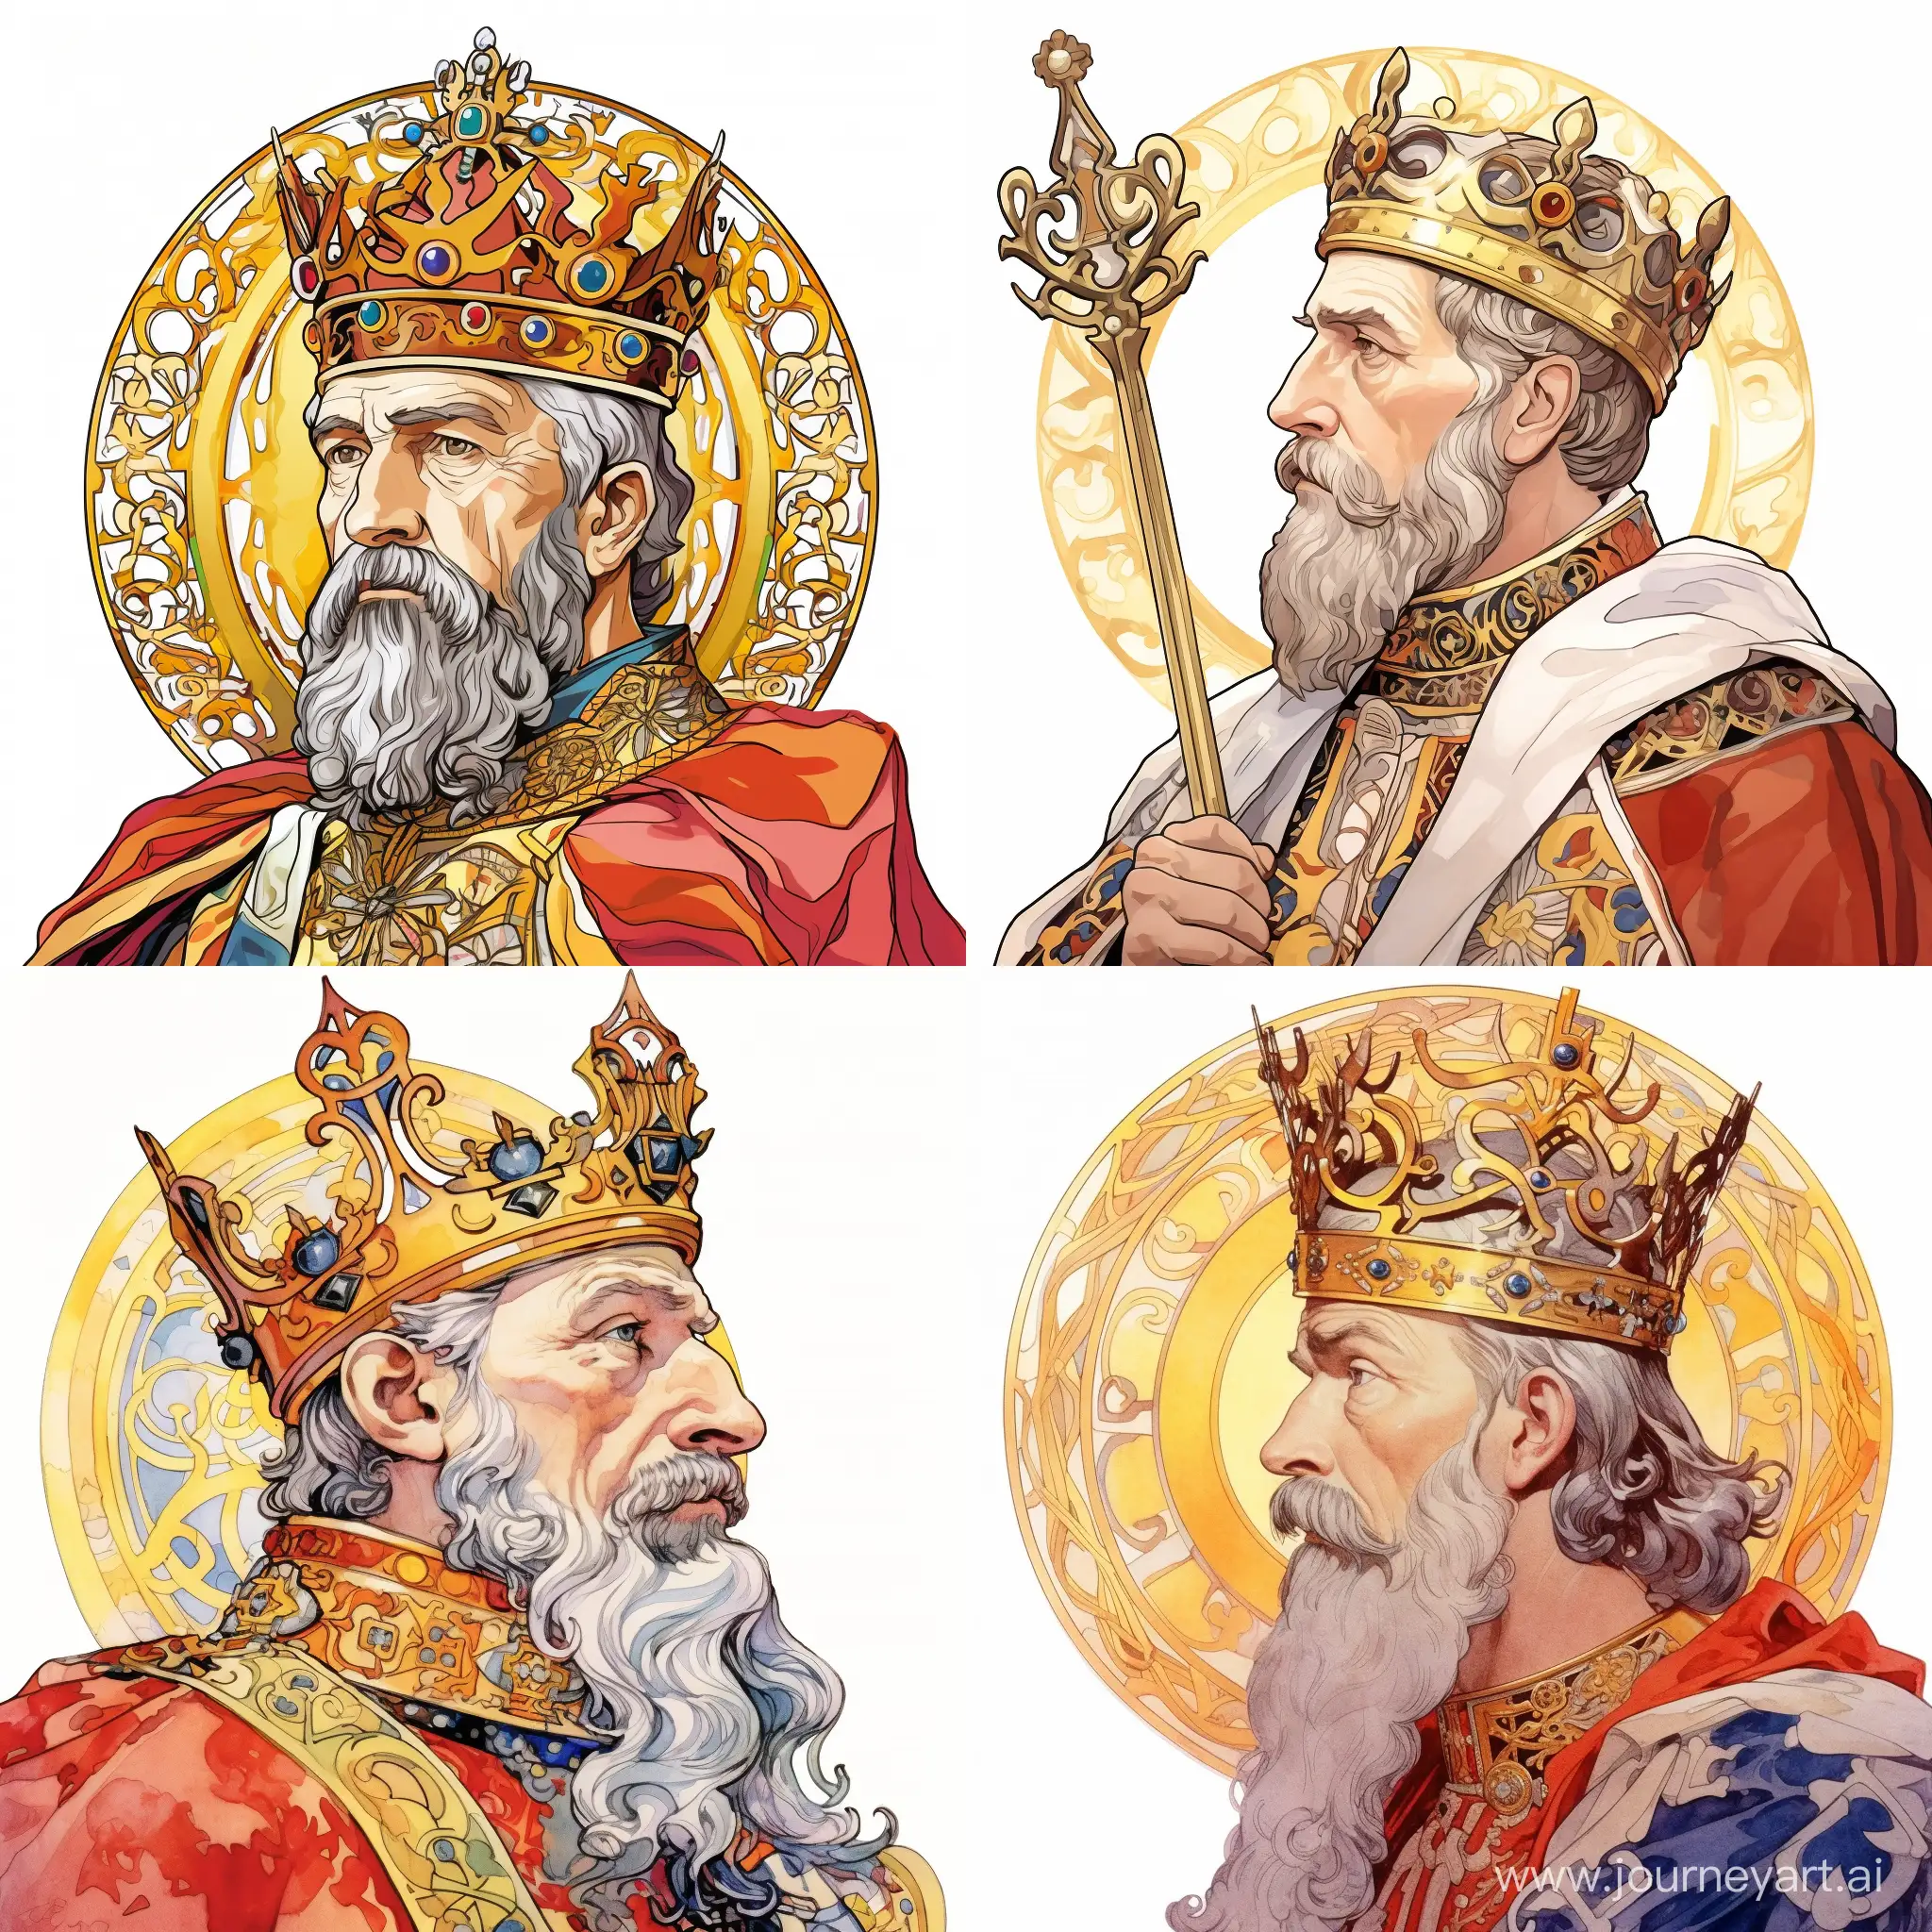 Charlemagne-Portrait-with-Crown-Colorful-Book-Illustration-Style